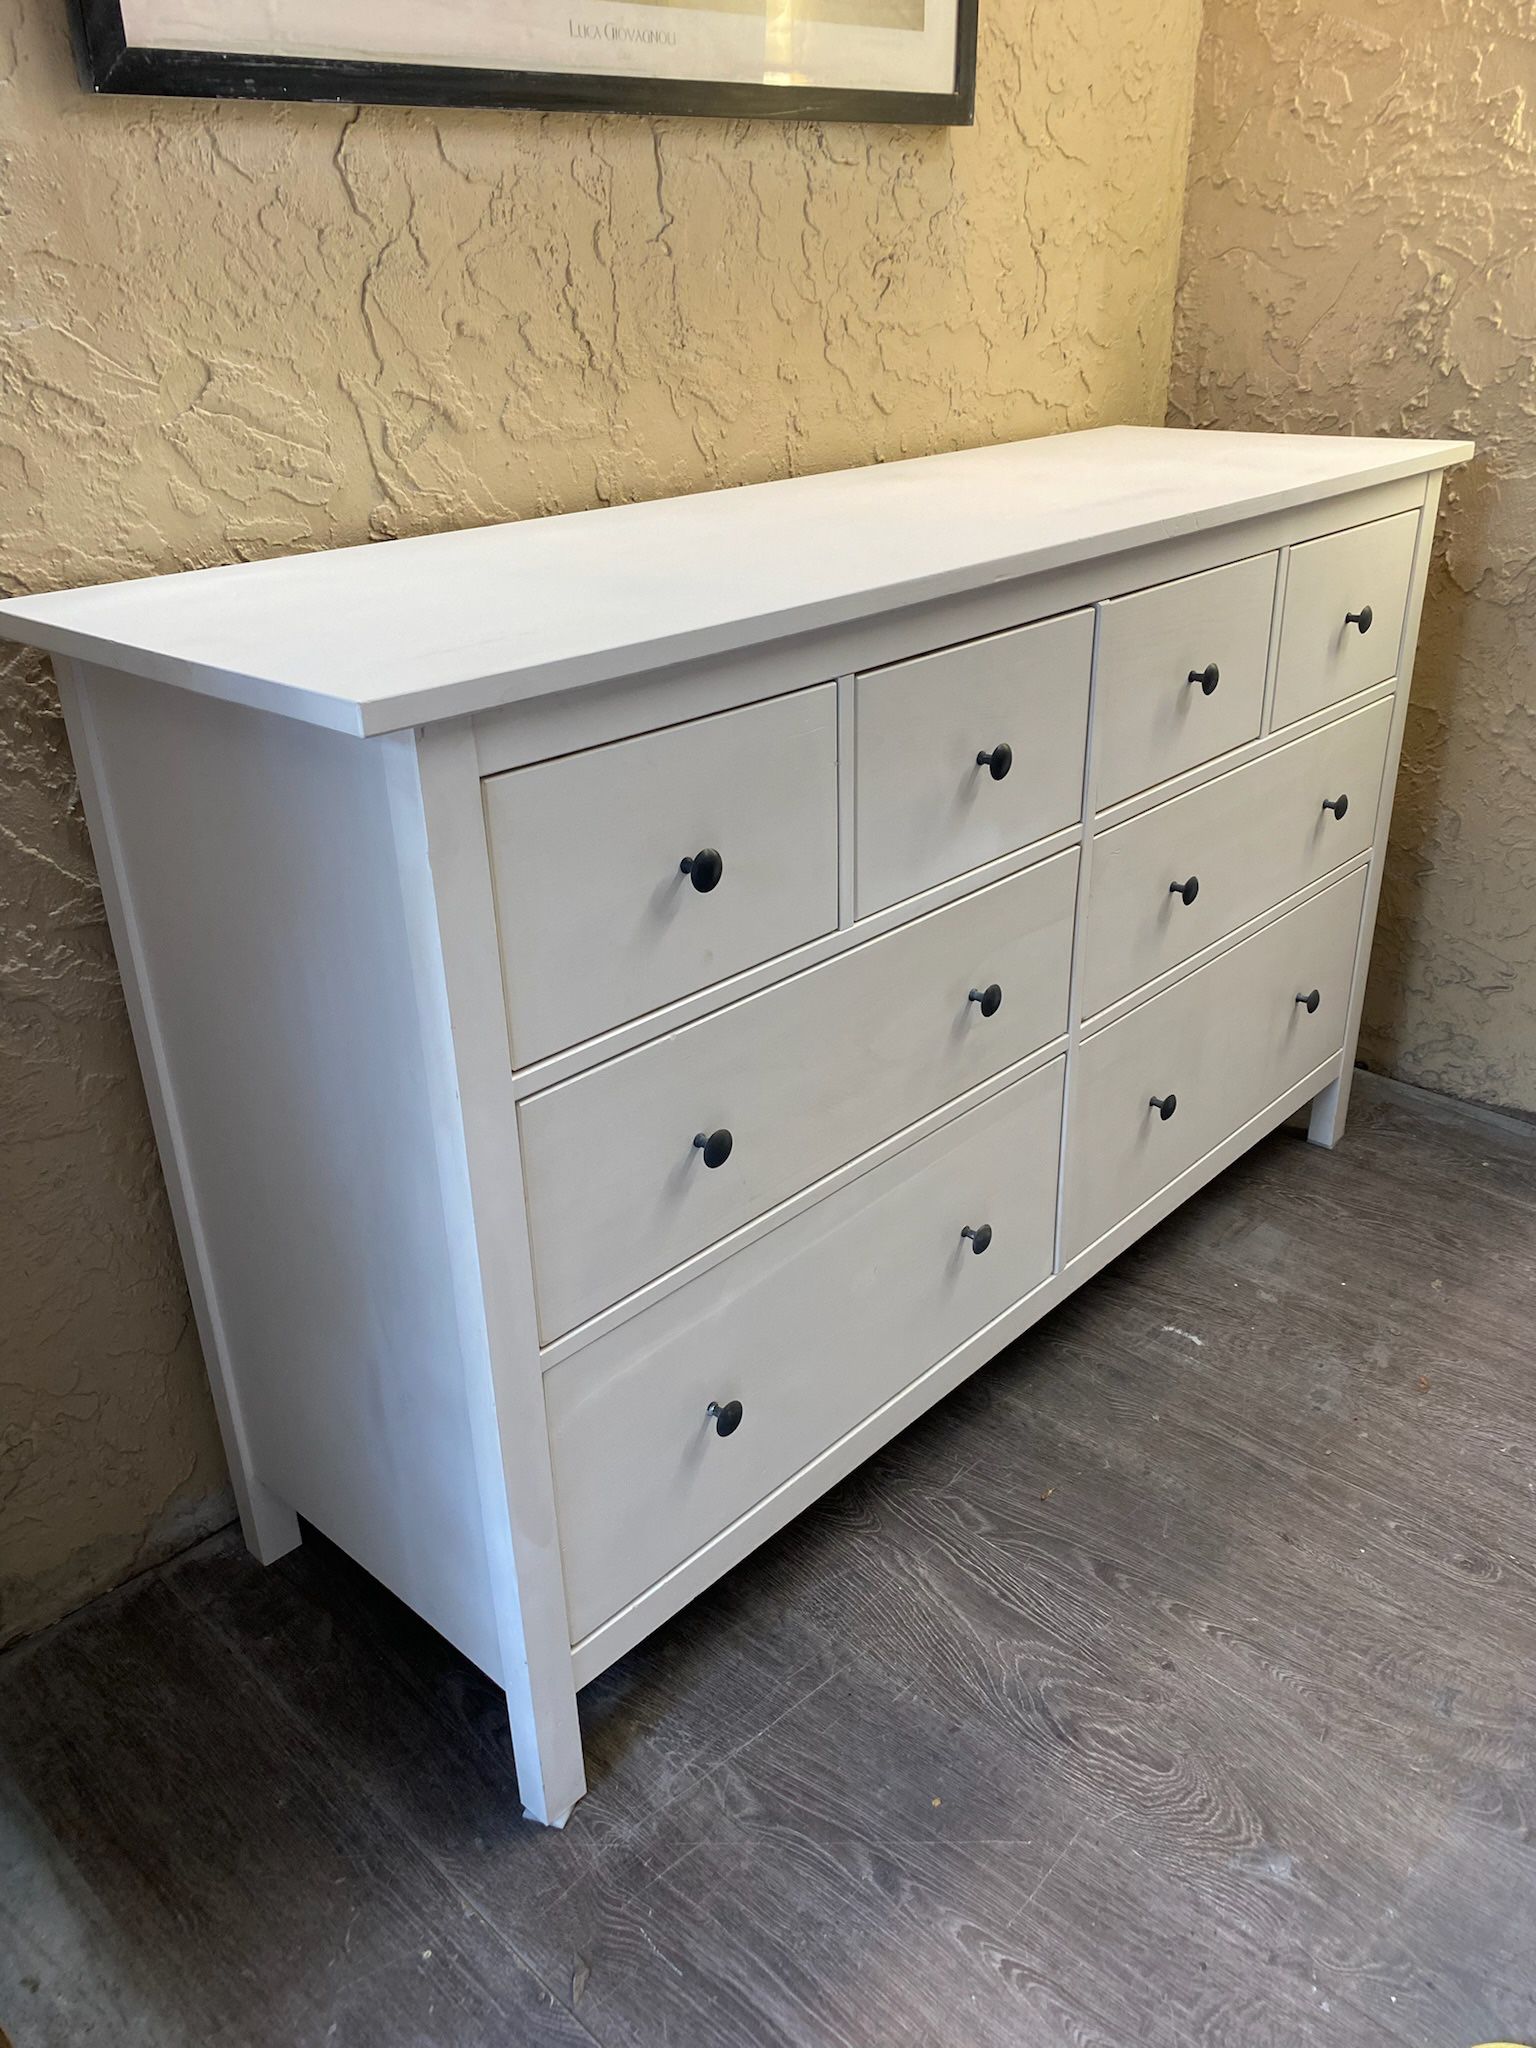 IKEA HEMNES SOLID WOOD 8 Drawer Dresser - Delivery Available For An Additional Fee - See My Other Items 😃